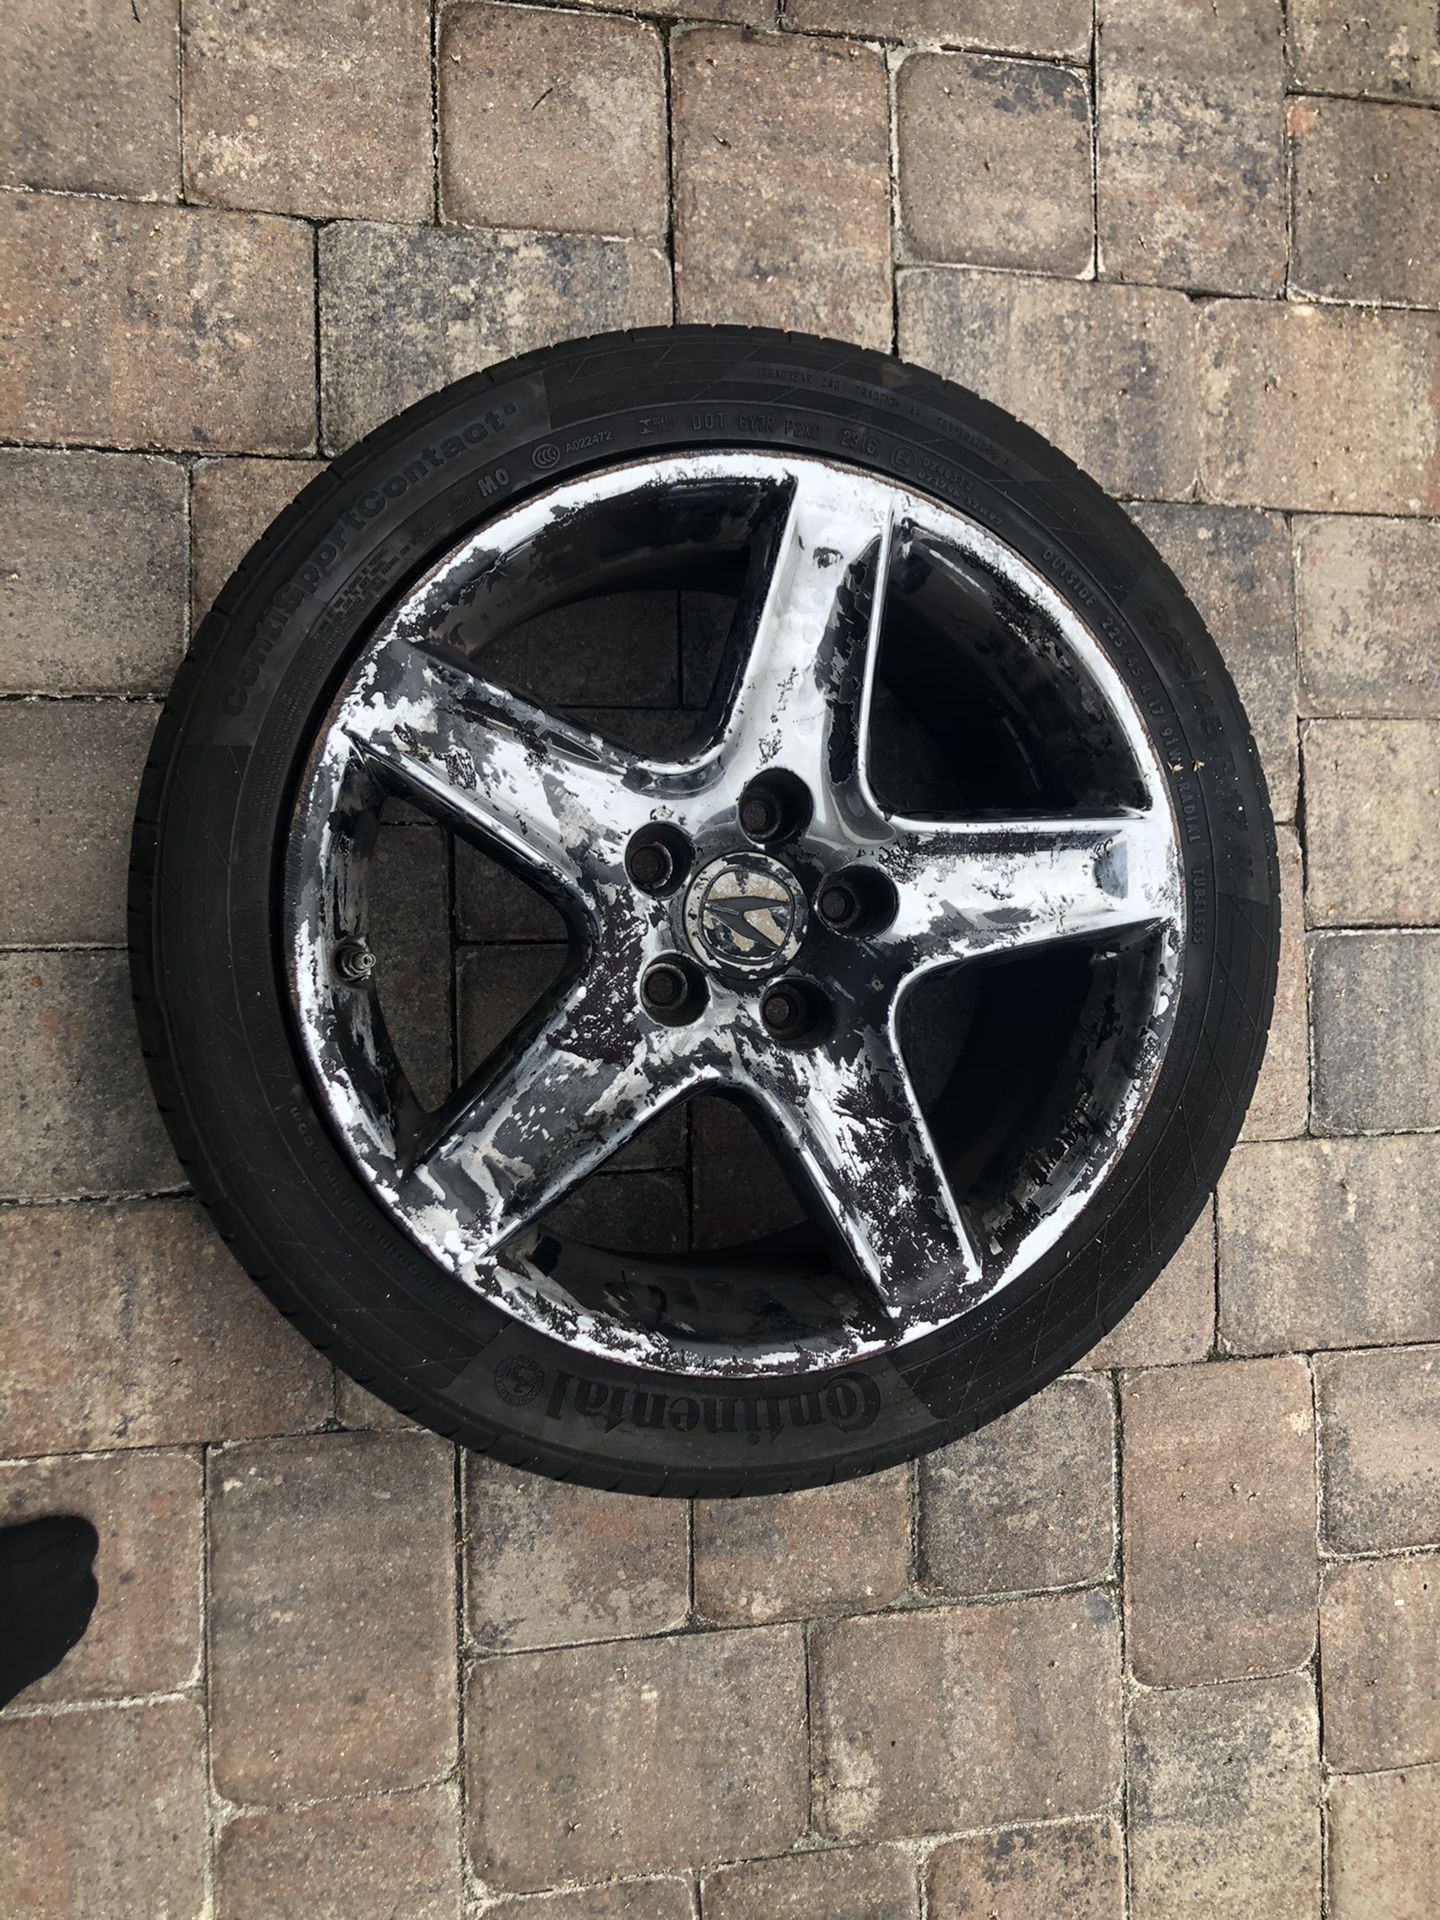 Acura TL rims and tires